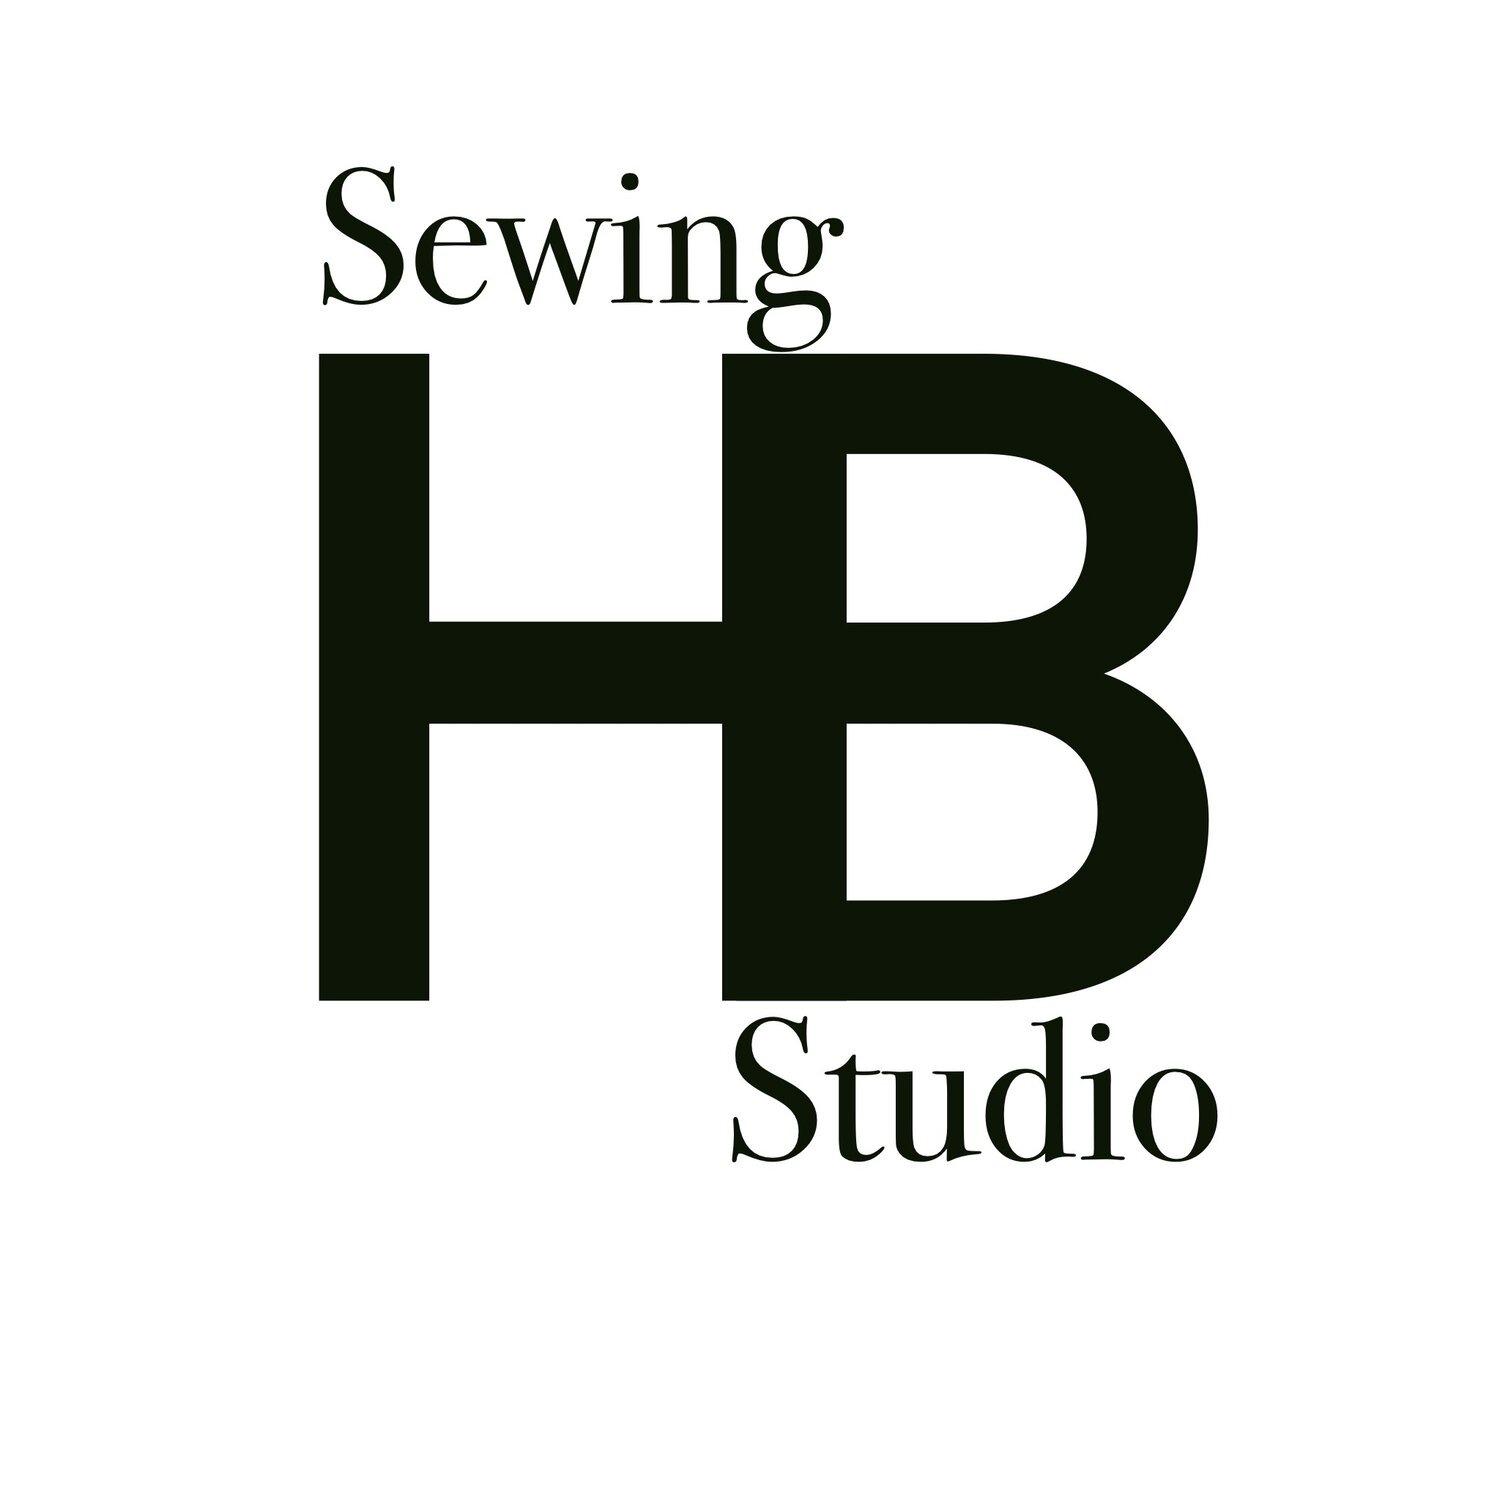 Heather Bell's Sewing Studio